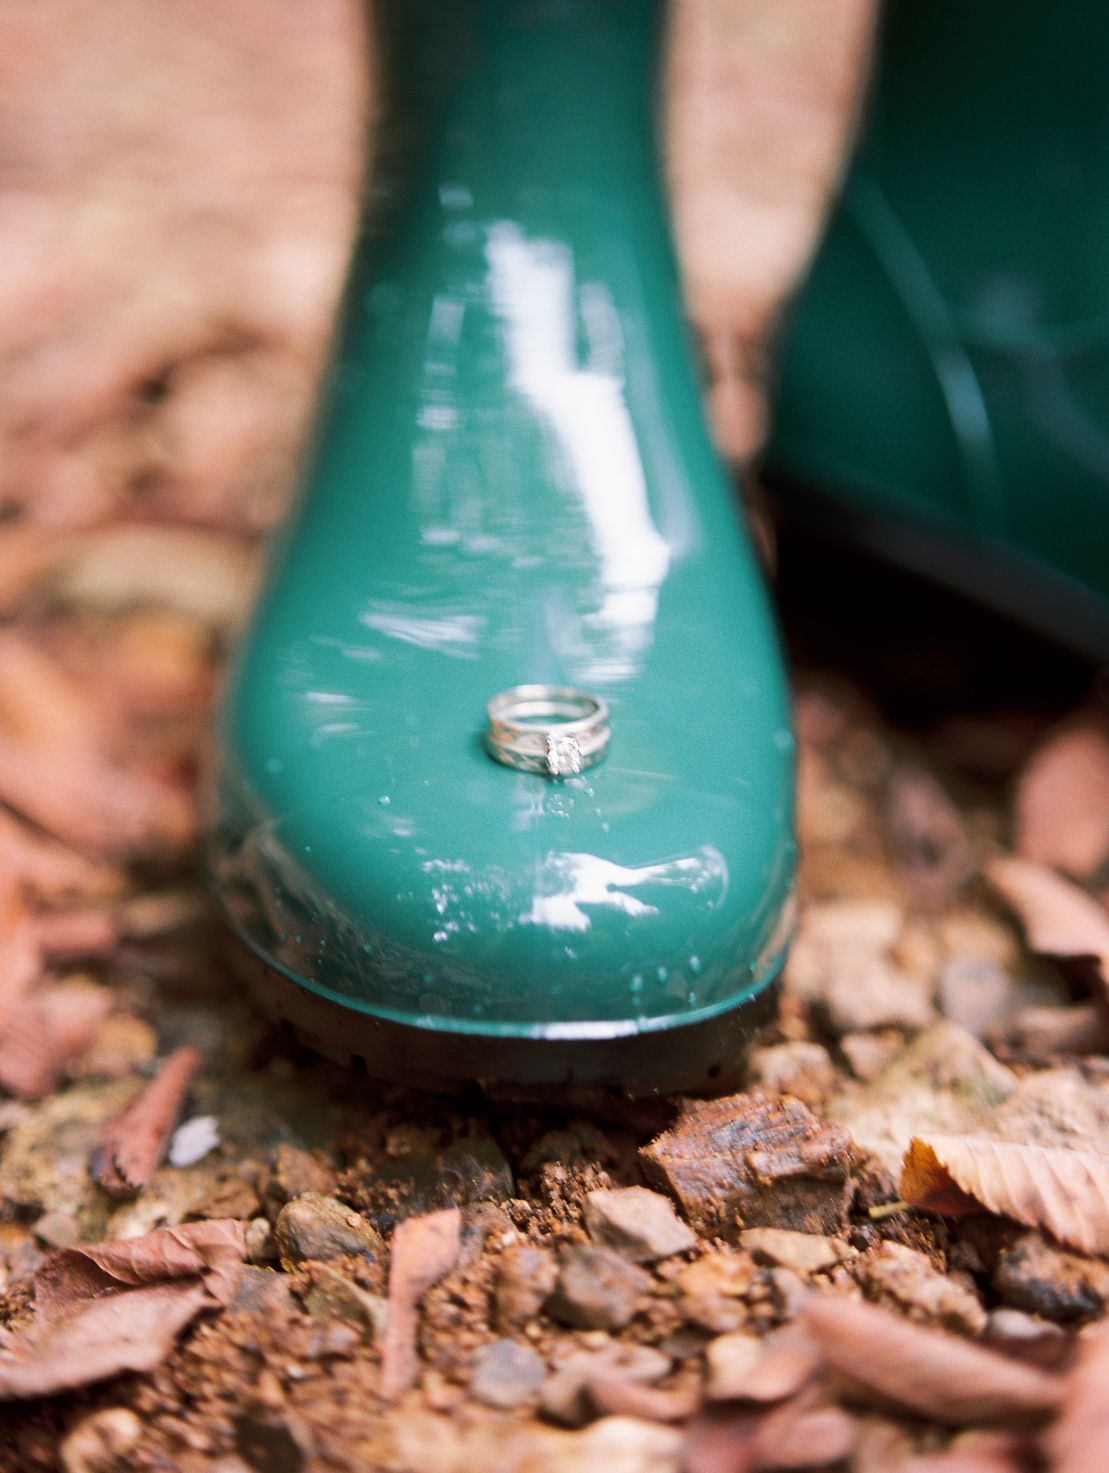 engagement ring on a rainboot